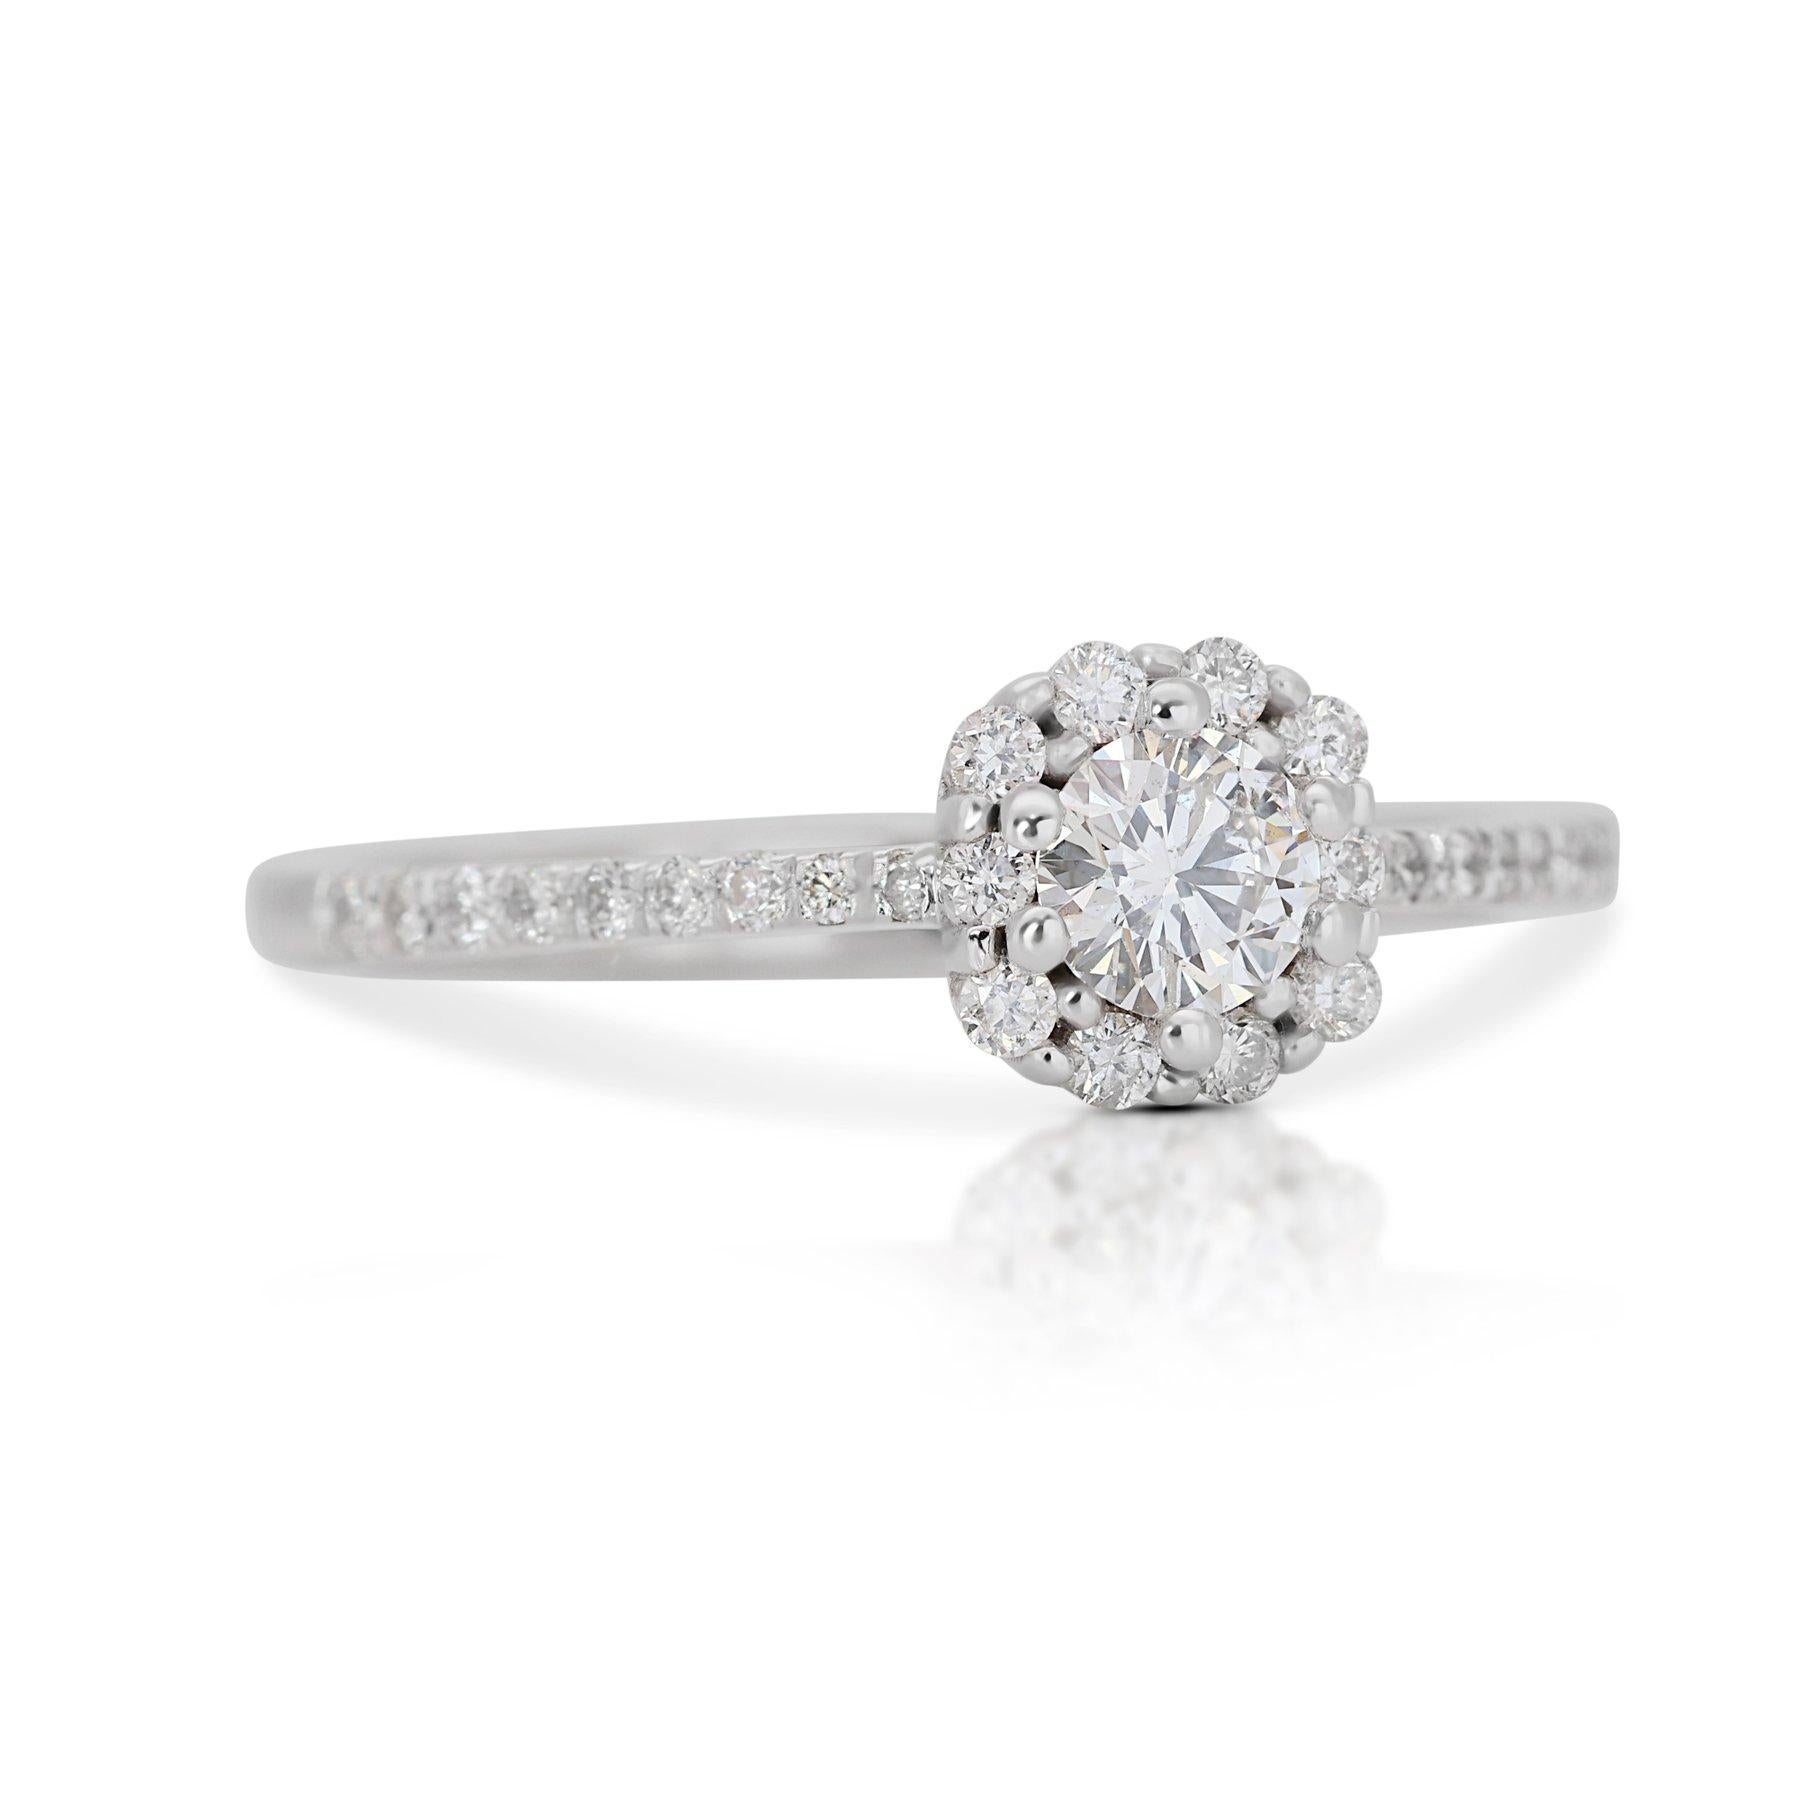 Luminous 14K White Gold Natural Diamond Halo Ring w/1.35ct

Introducing our stunning Round Brilliant Ideal Cut Diamond Ring, a timeless symbol of everlasting love and sophistication. At the heart of this exquisite ring lies a dazzling 0.70 carat